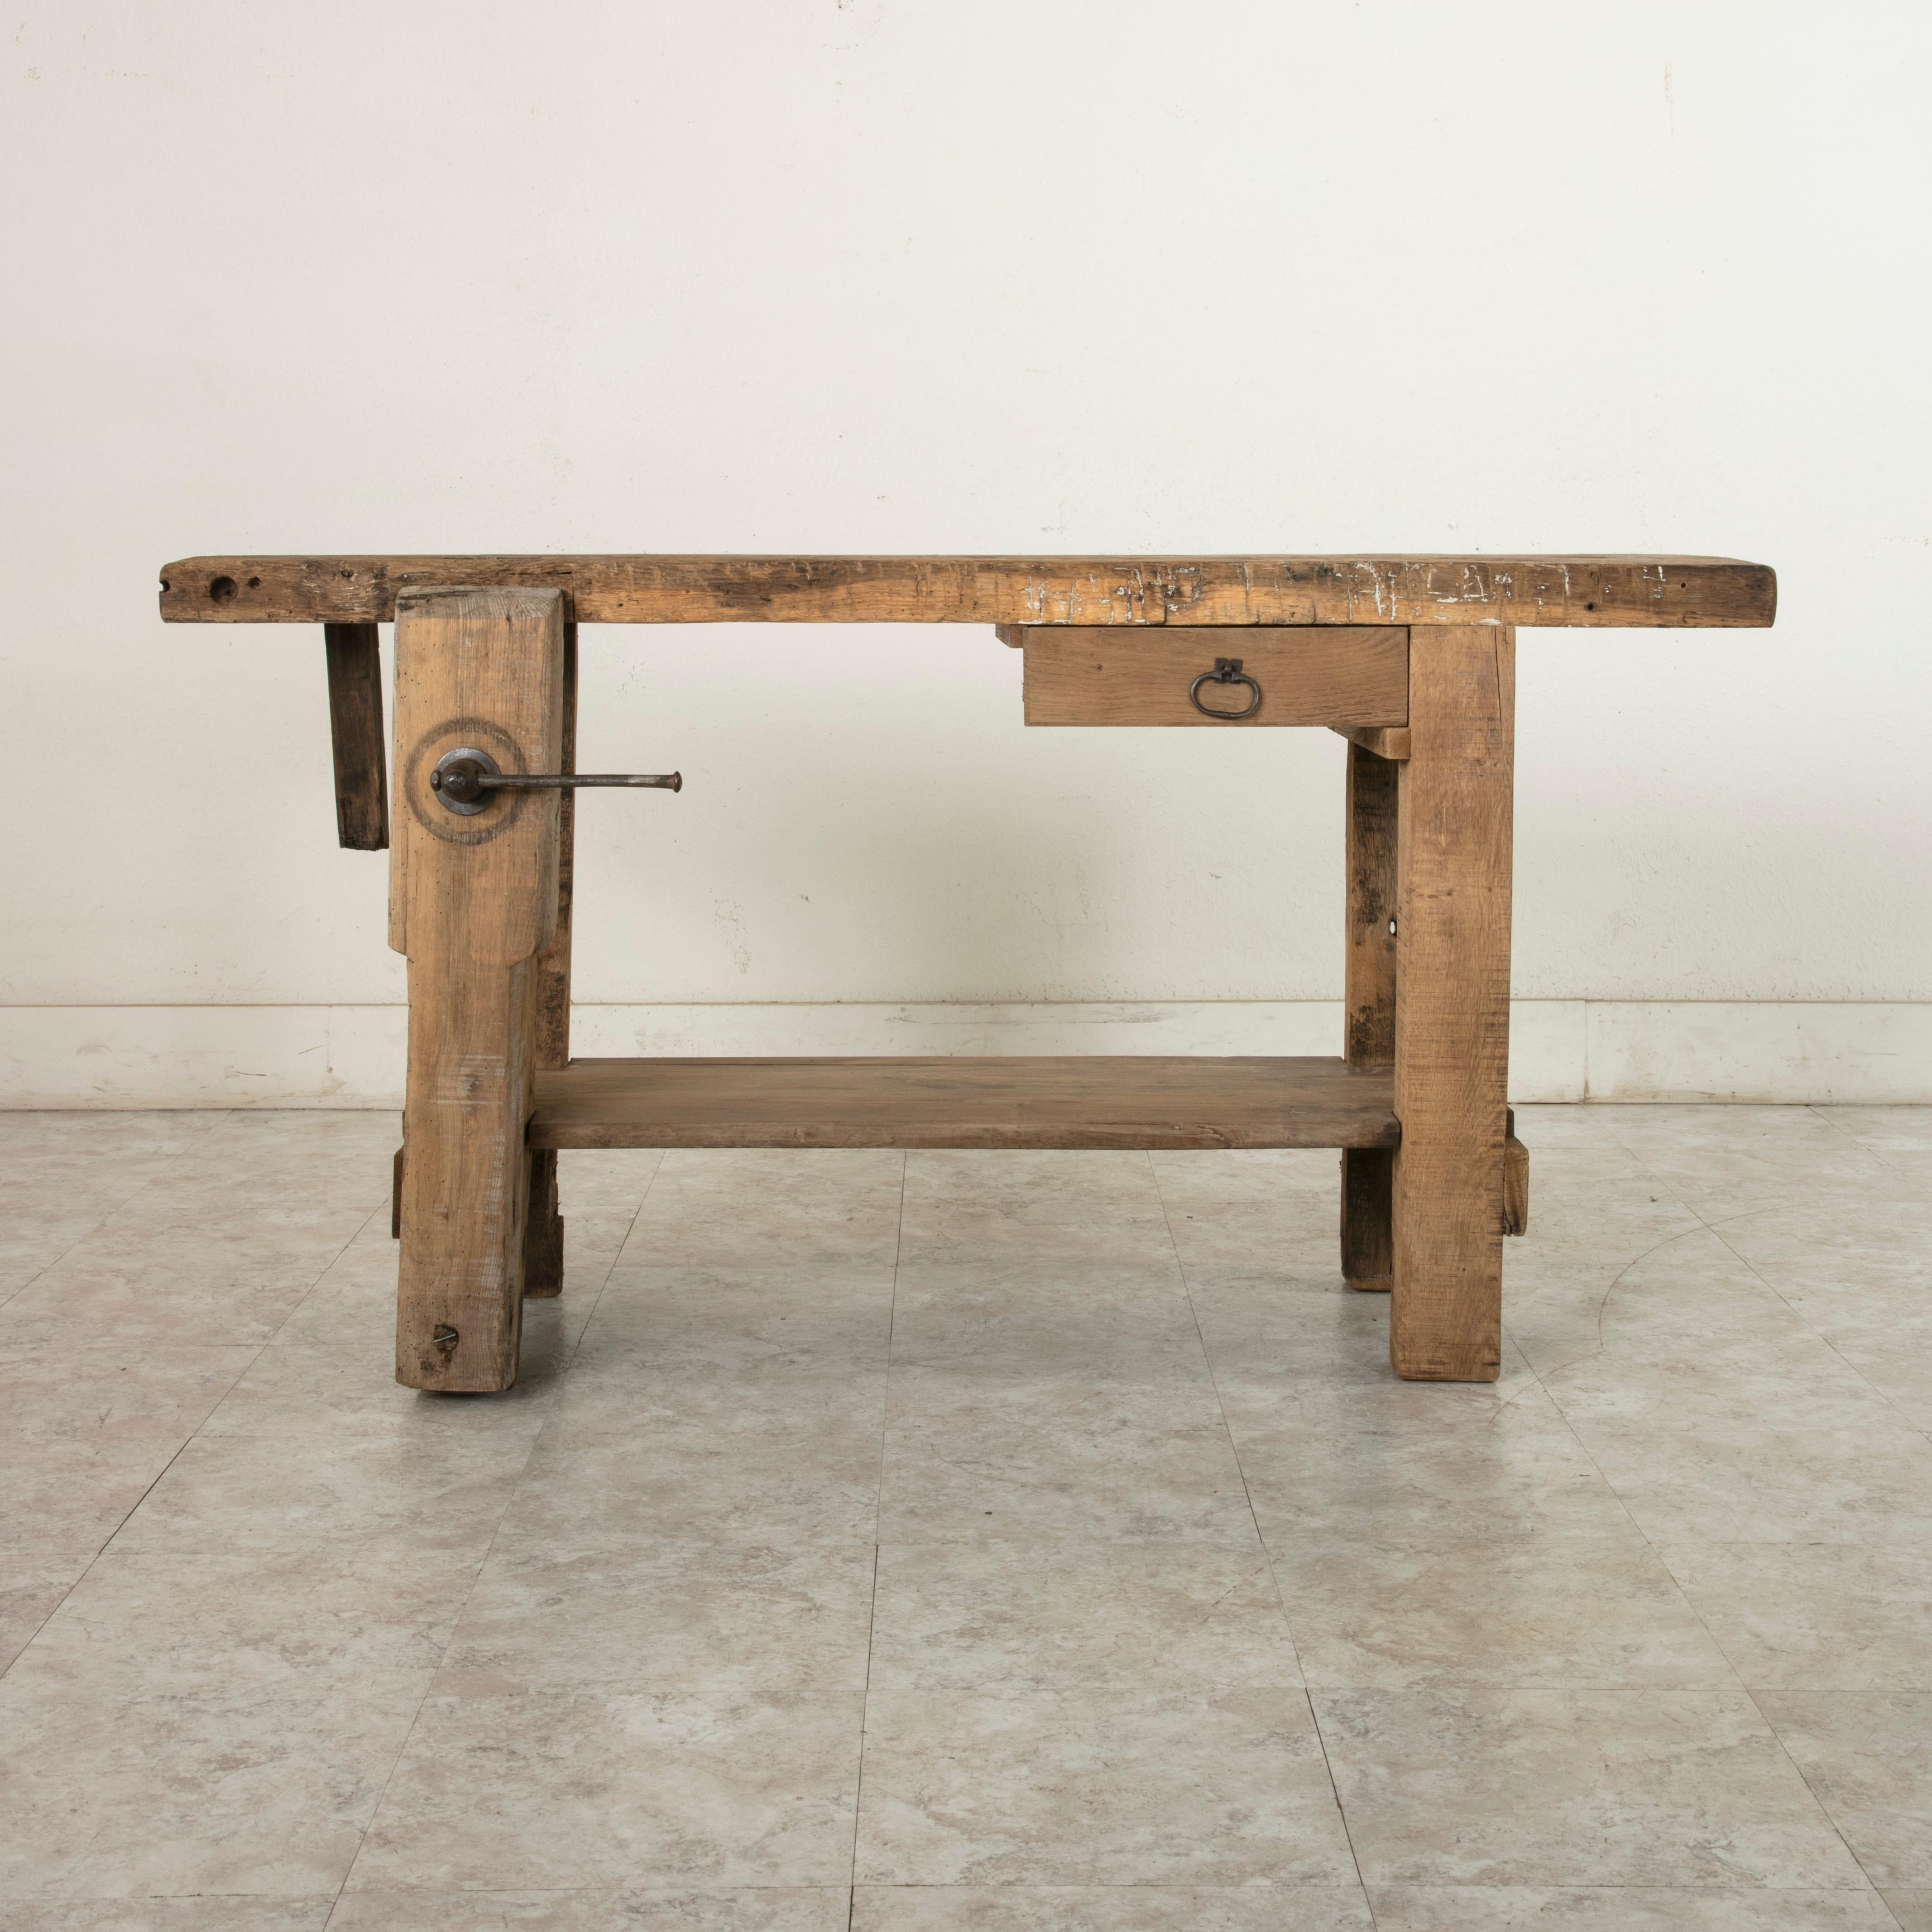 This French oak workbench from the late 19th century is full of character. It features a two and a half inch thick top constructed from a single plank of wood that is joined to the base using mortise and tenon joinery. A single drawer fits under the